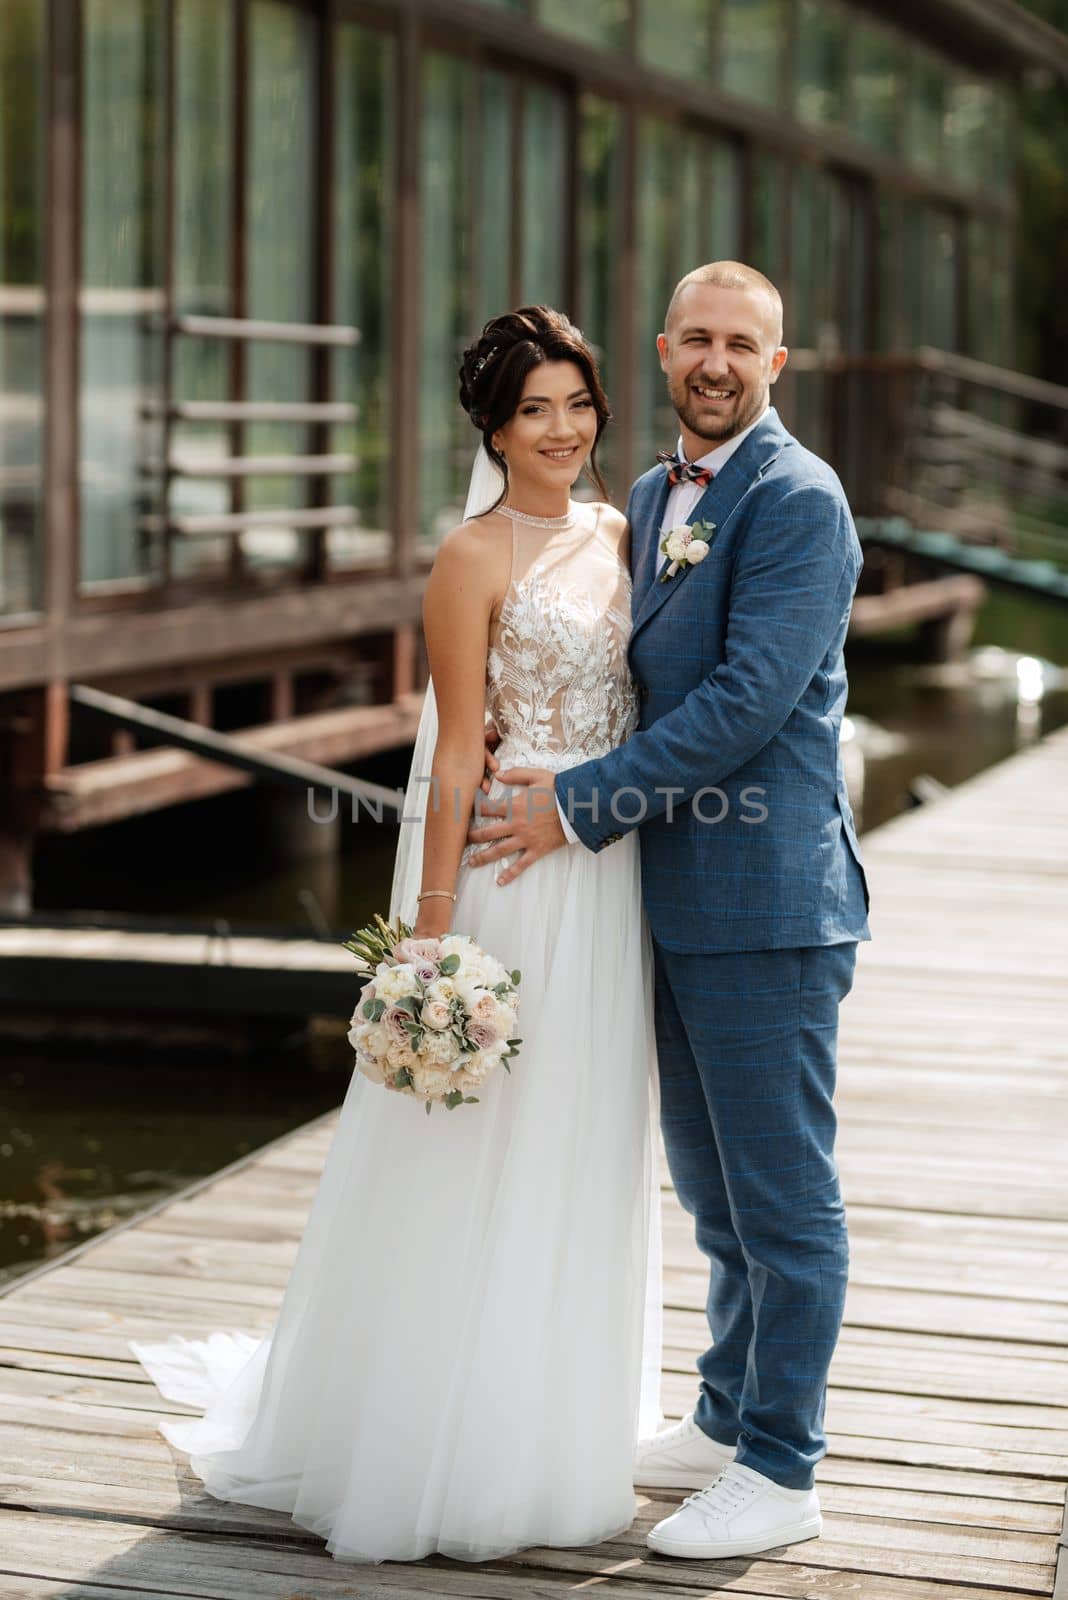 the first meeting of the bride and groom in wedding dresses on the pier near the water